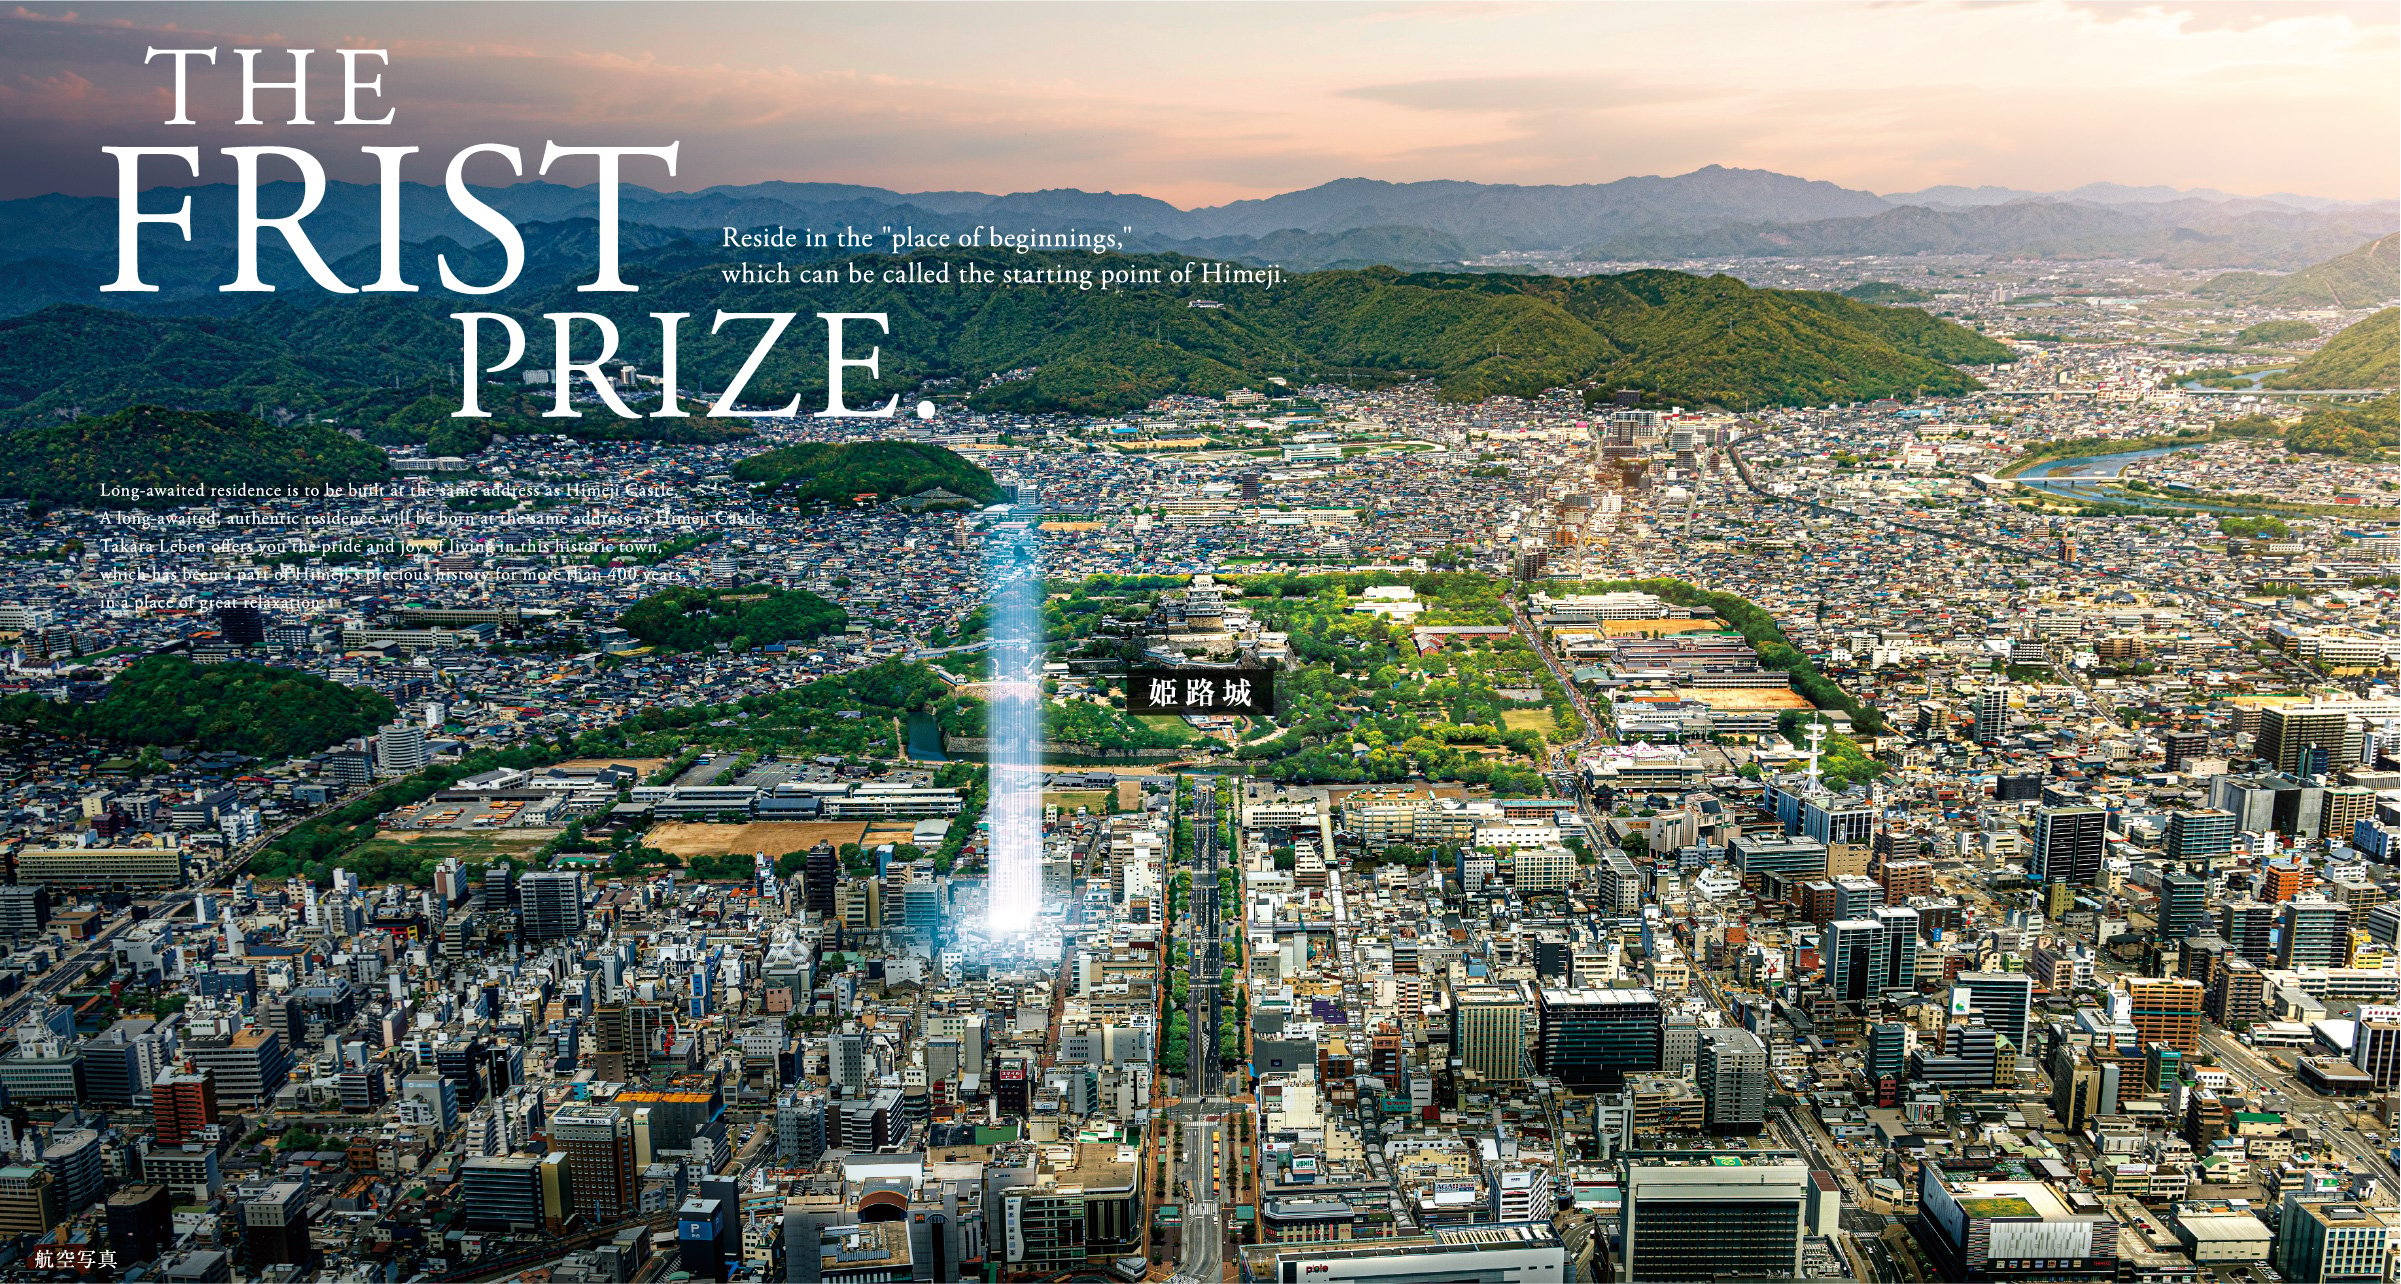 THE FRIST PRIZE. Reside in the place of beginnings, which can be called the starting point of Himeji.航空写真